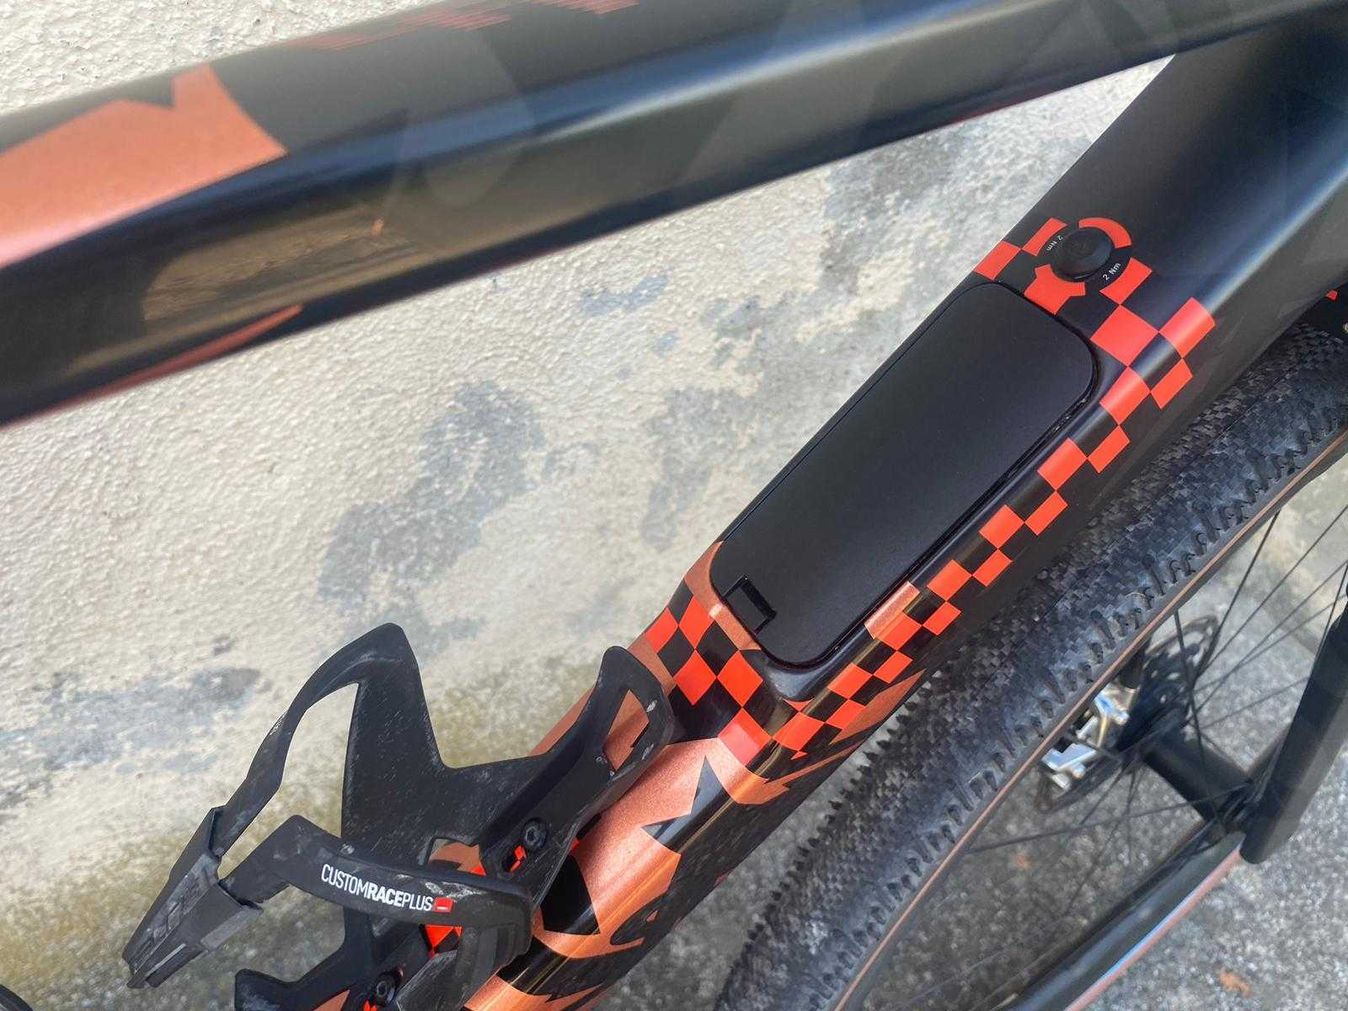 The new Grail has in-frame storage on the head tube